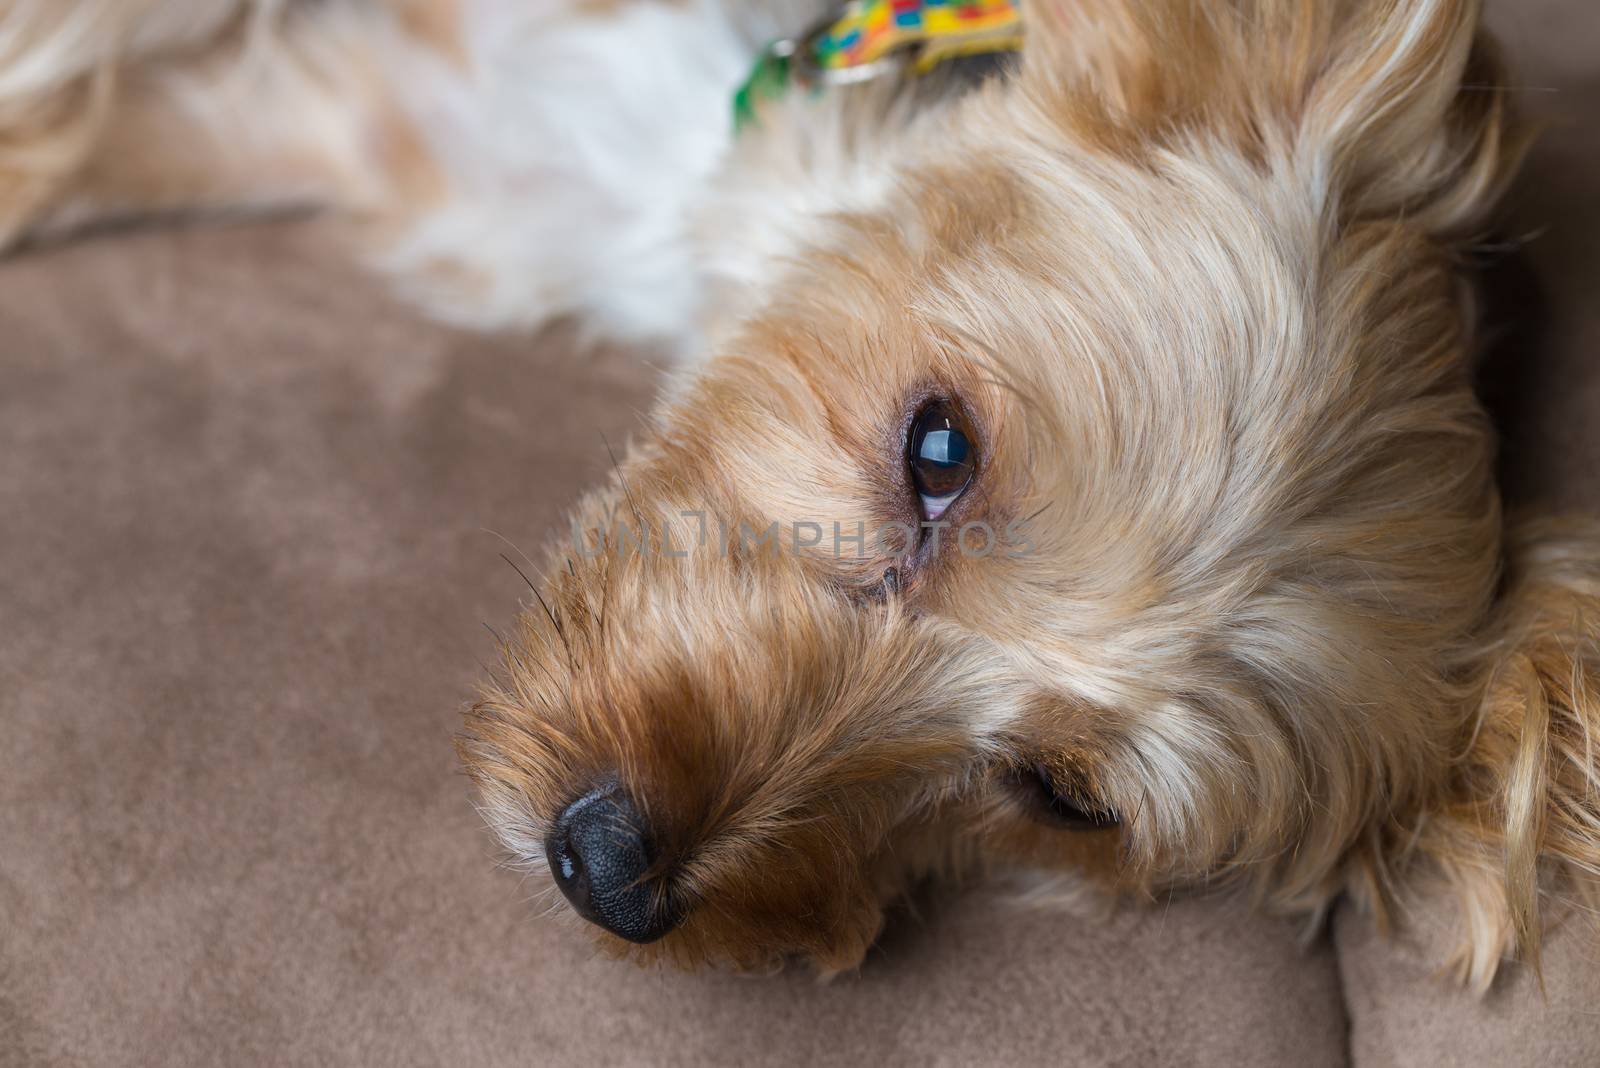 A cute yorkshire terrier laying on a couch wearing a collar.